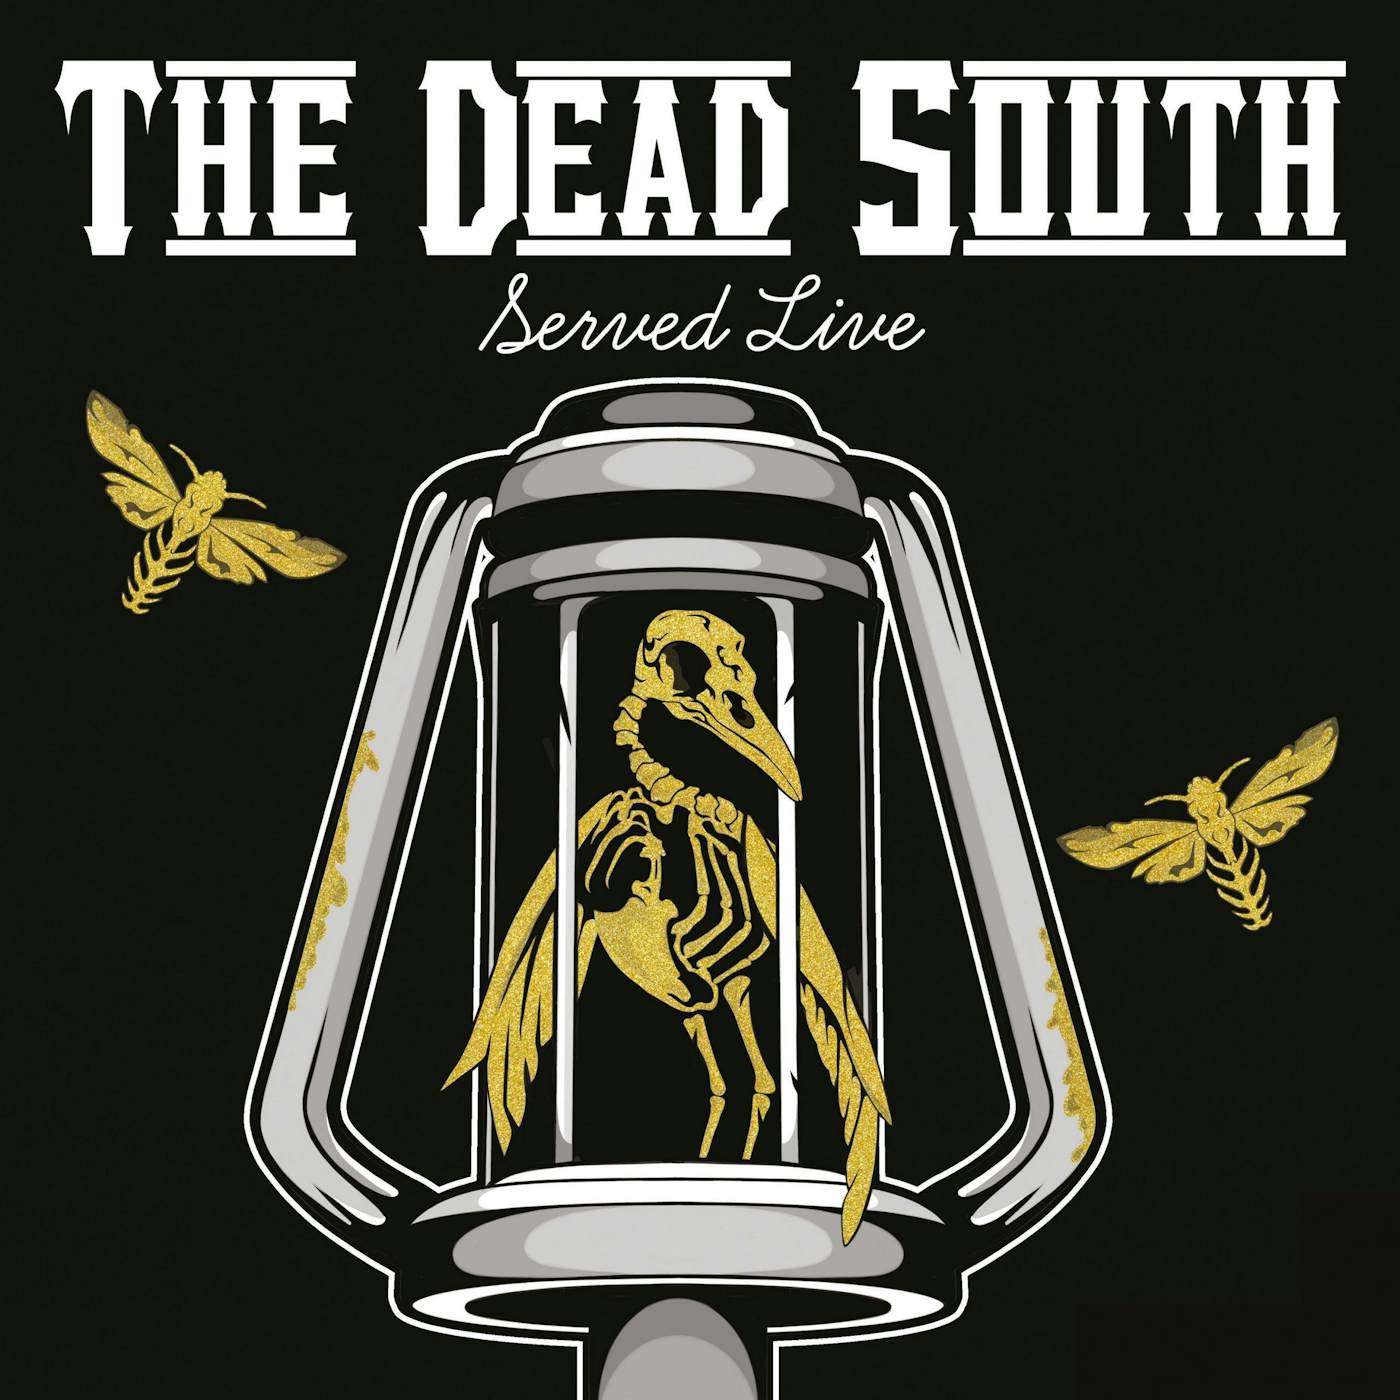 The Dead South Served Live Vinyl Record